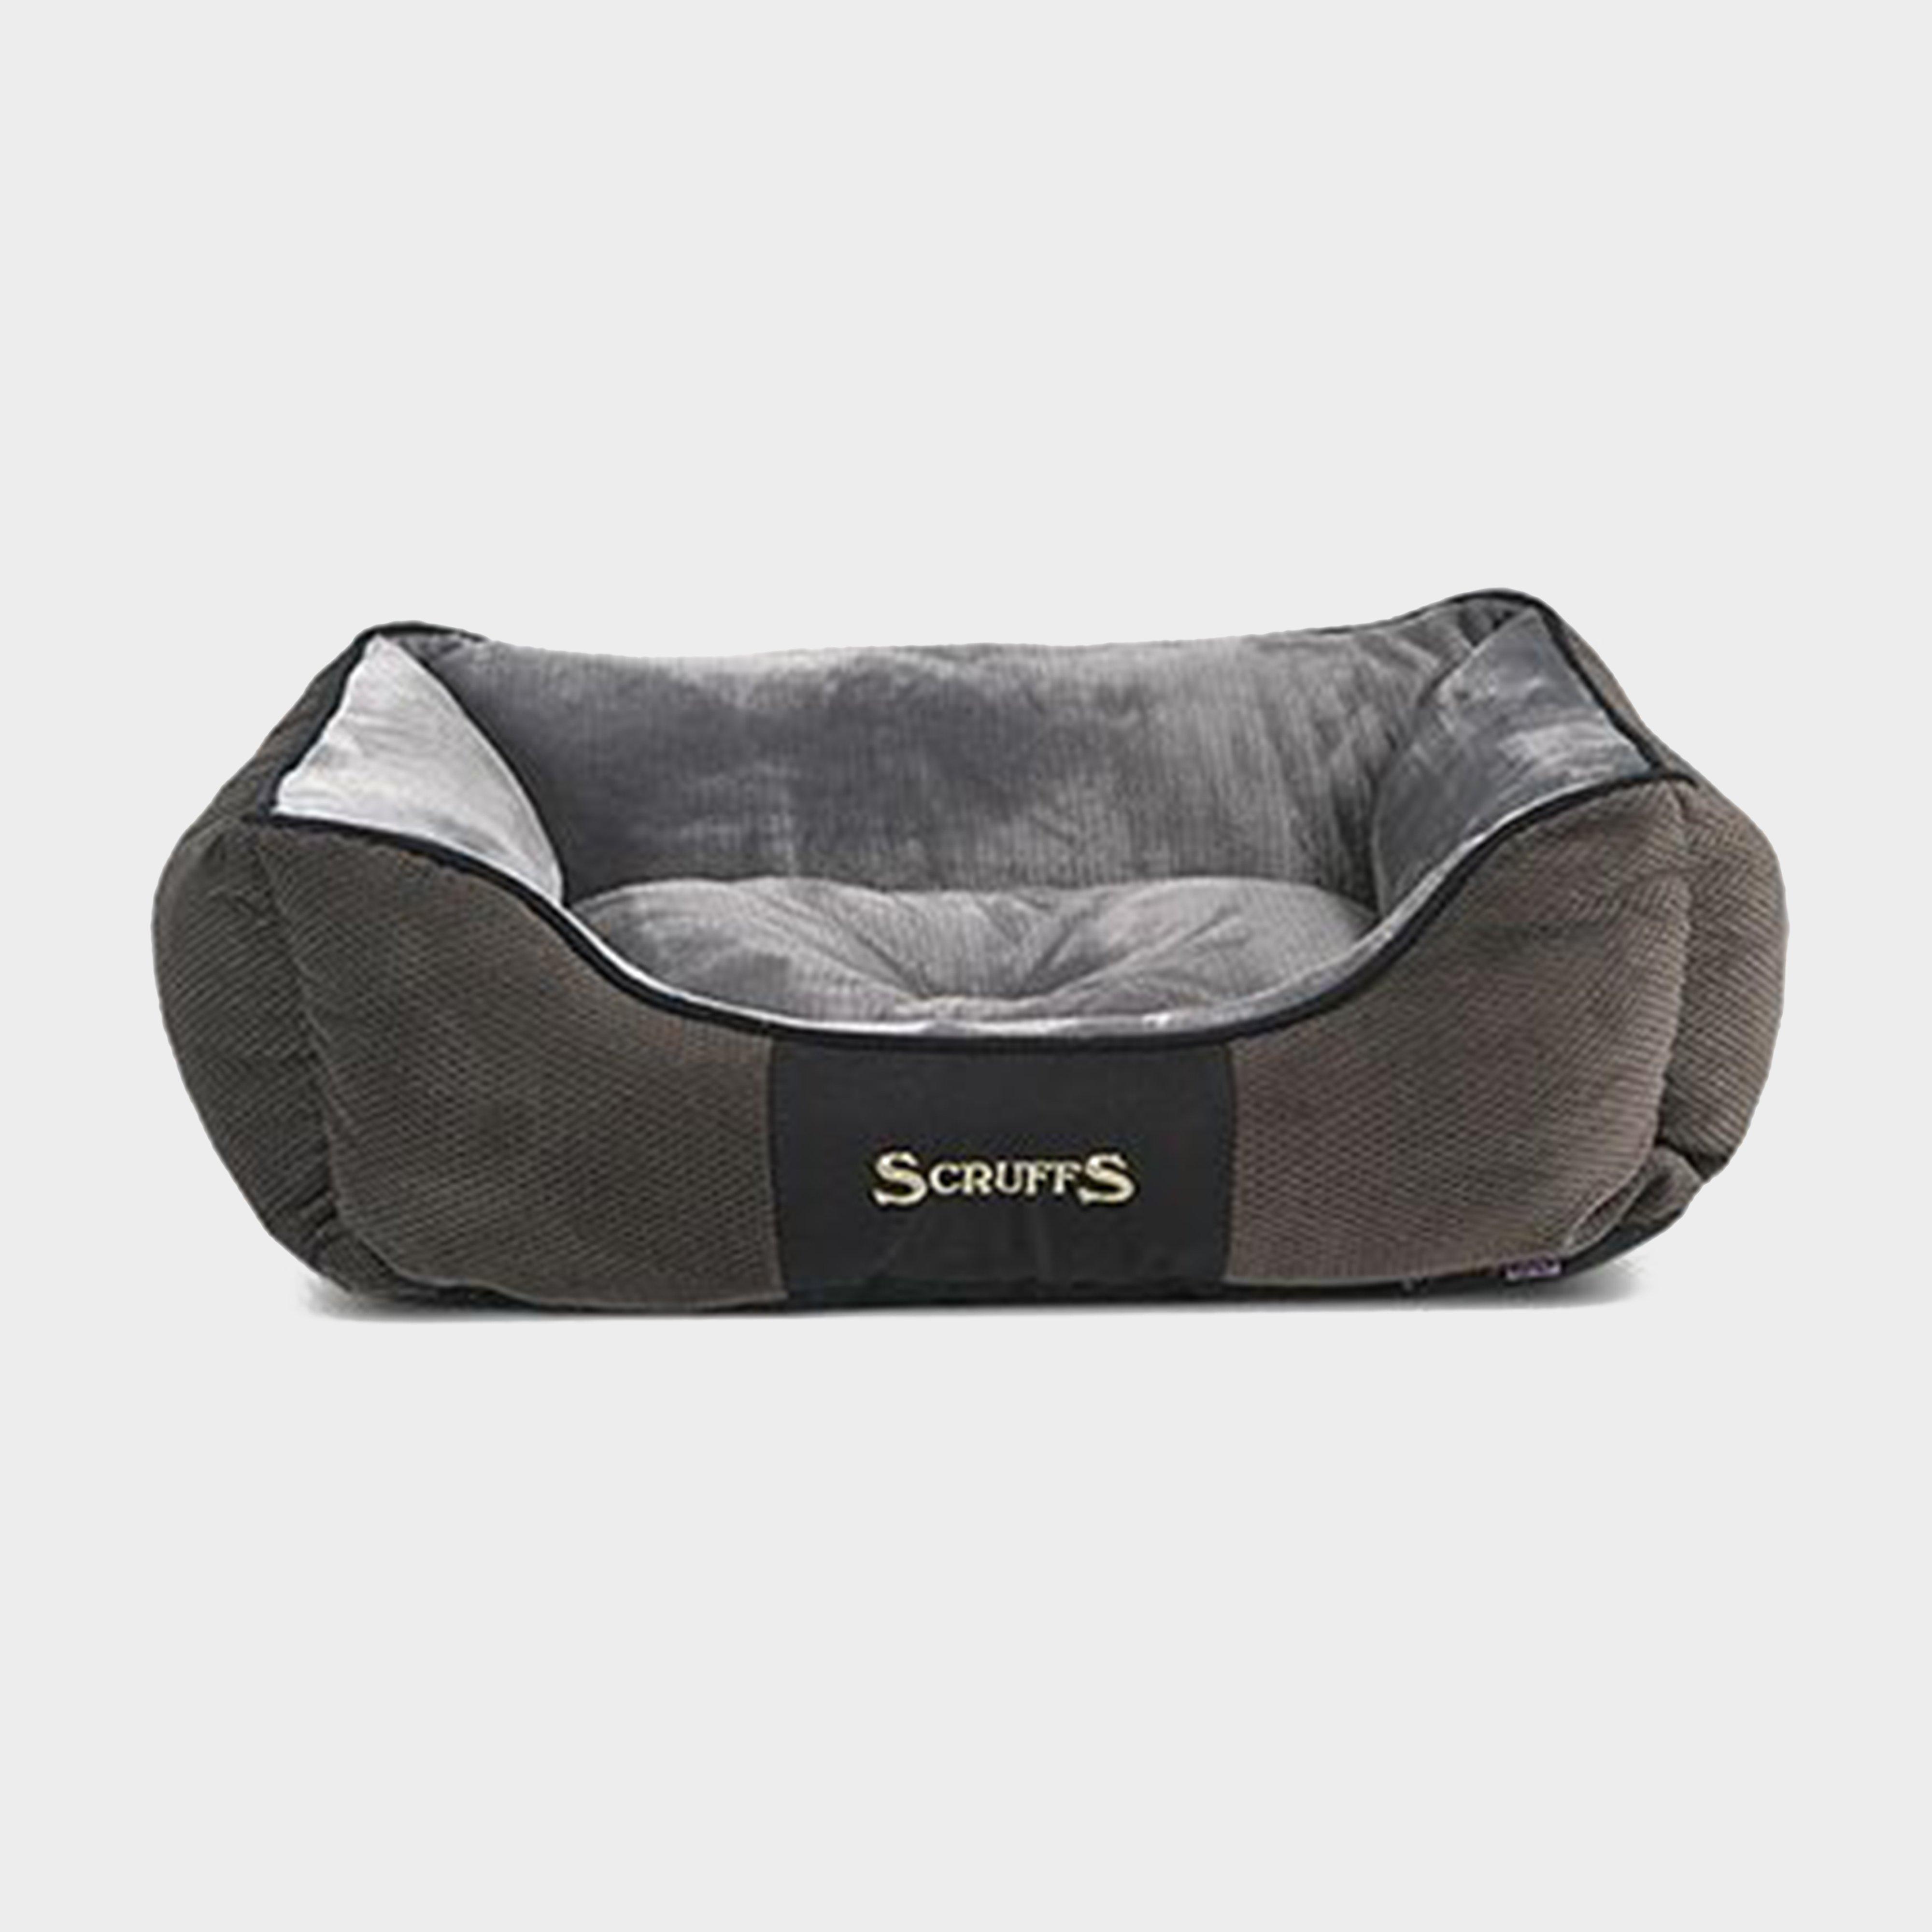  Scruffs Chester Dog Bed Small, Grey